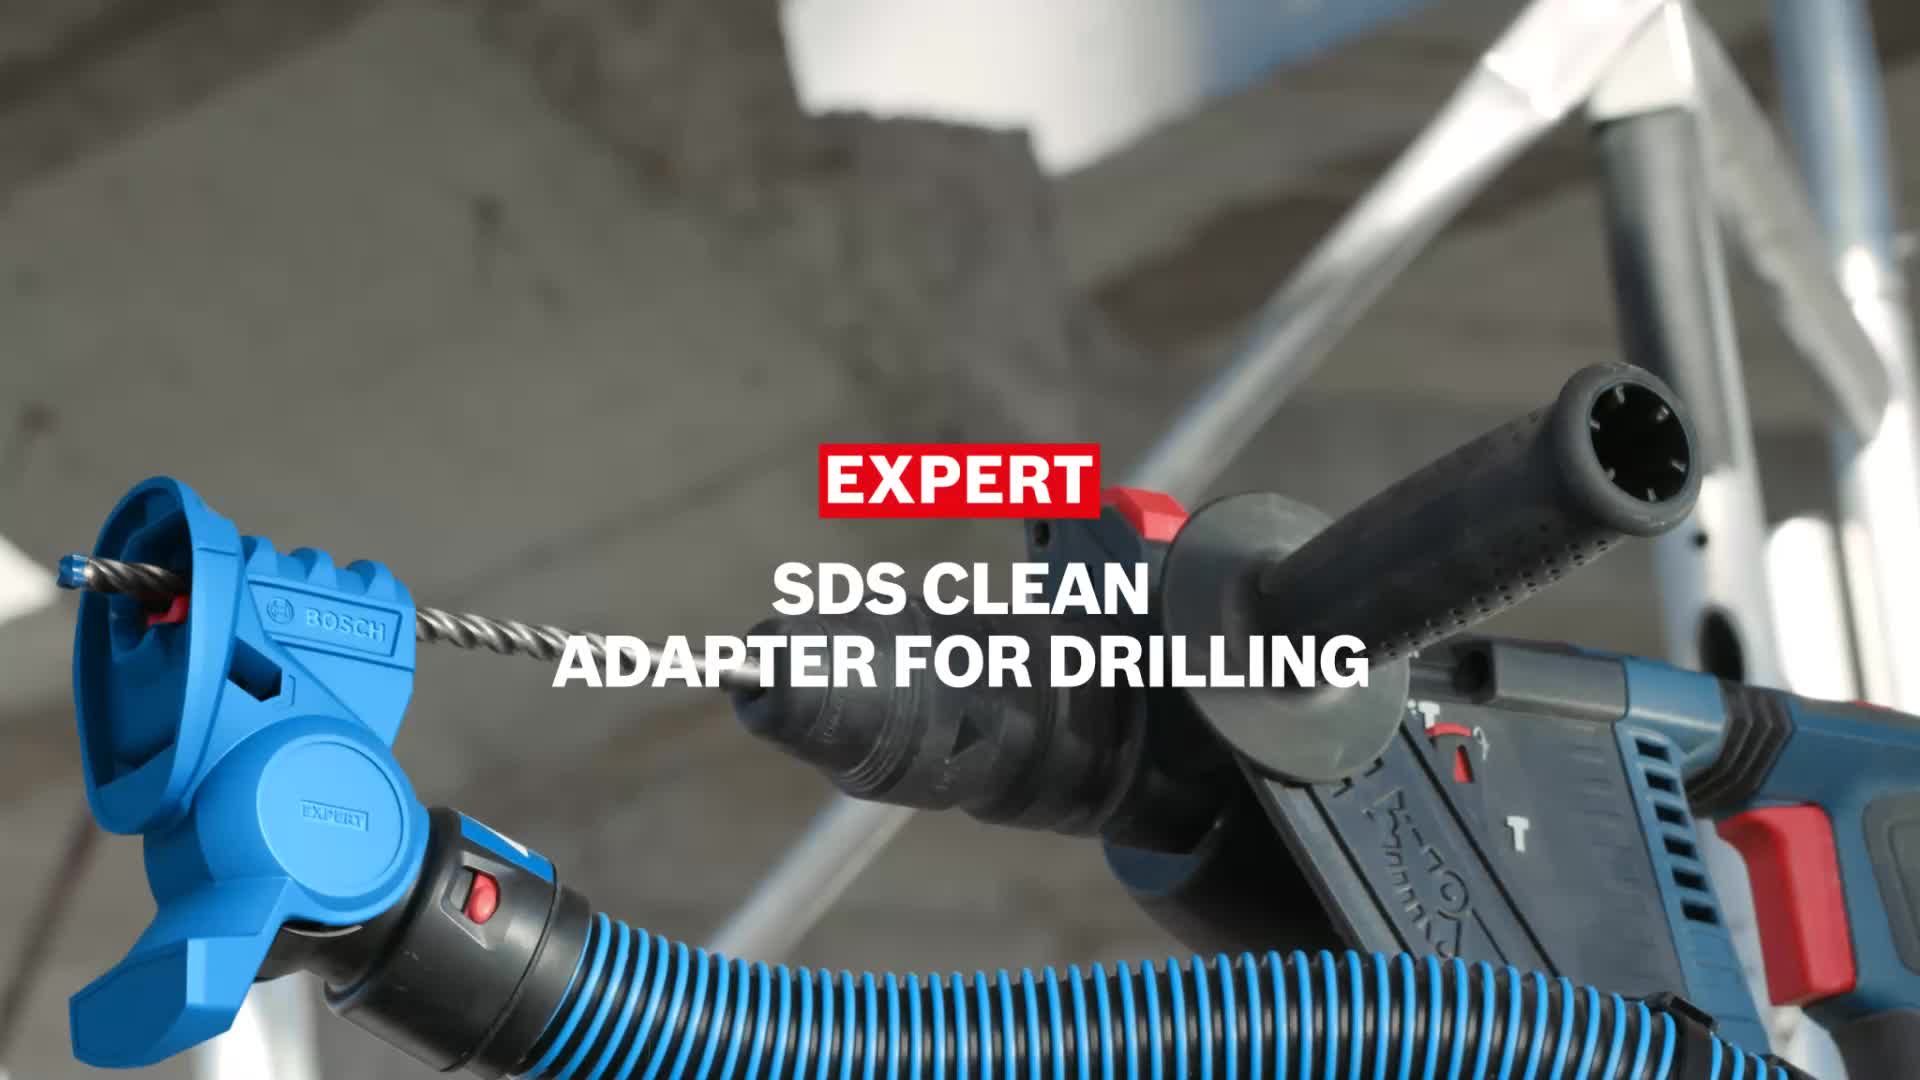 EXPERT SDS Clean Adapter for Drilling